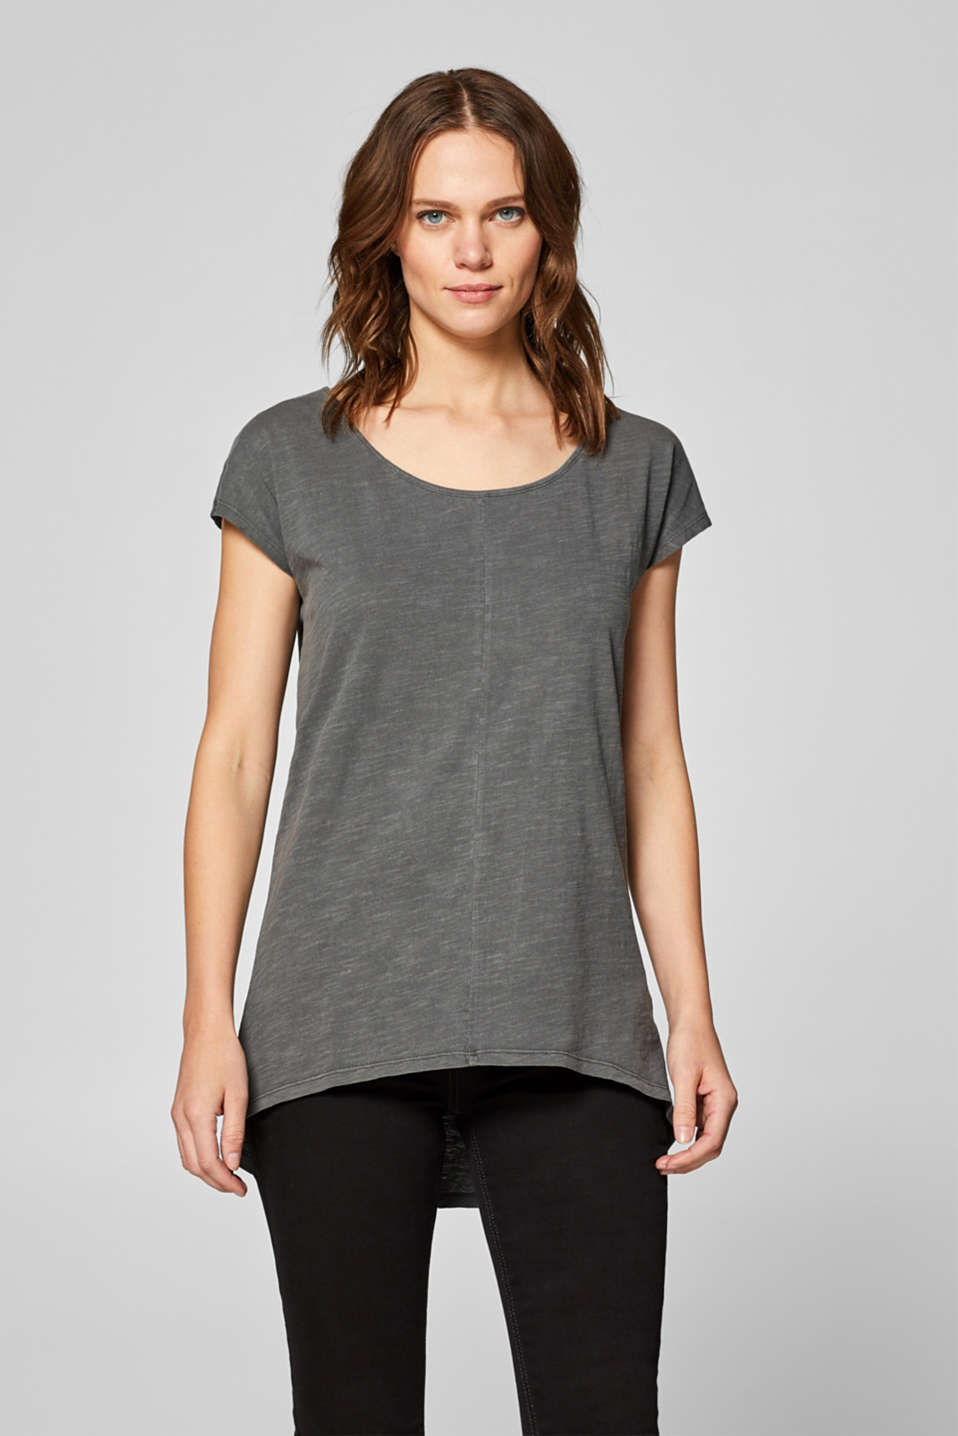 Download edc - T-shirt with a high-low hem, 100% cotton at our ...